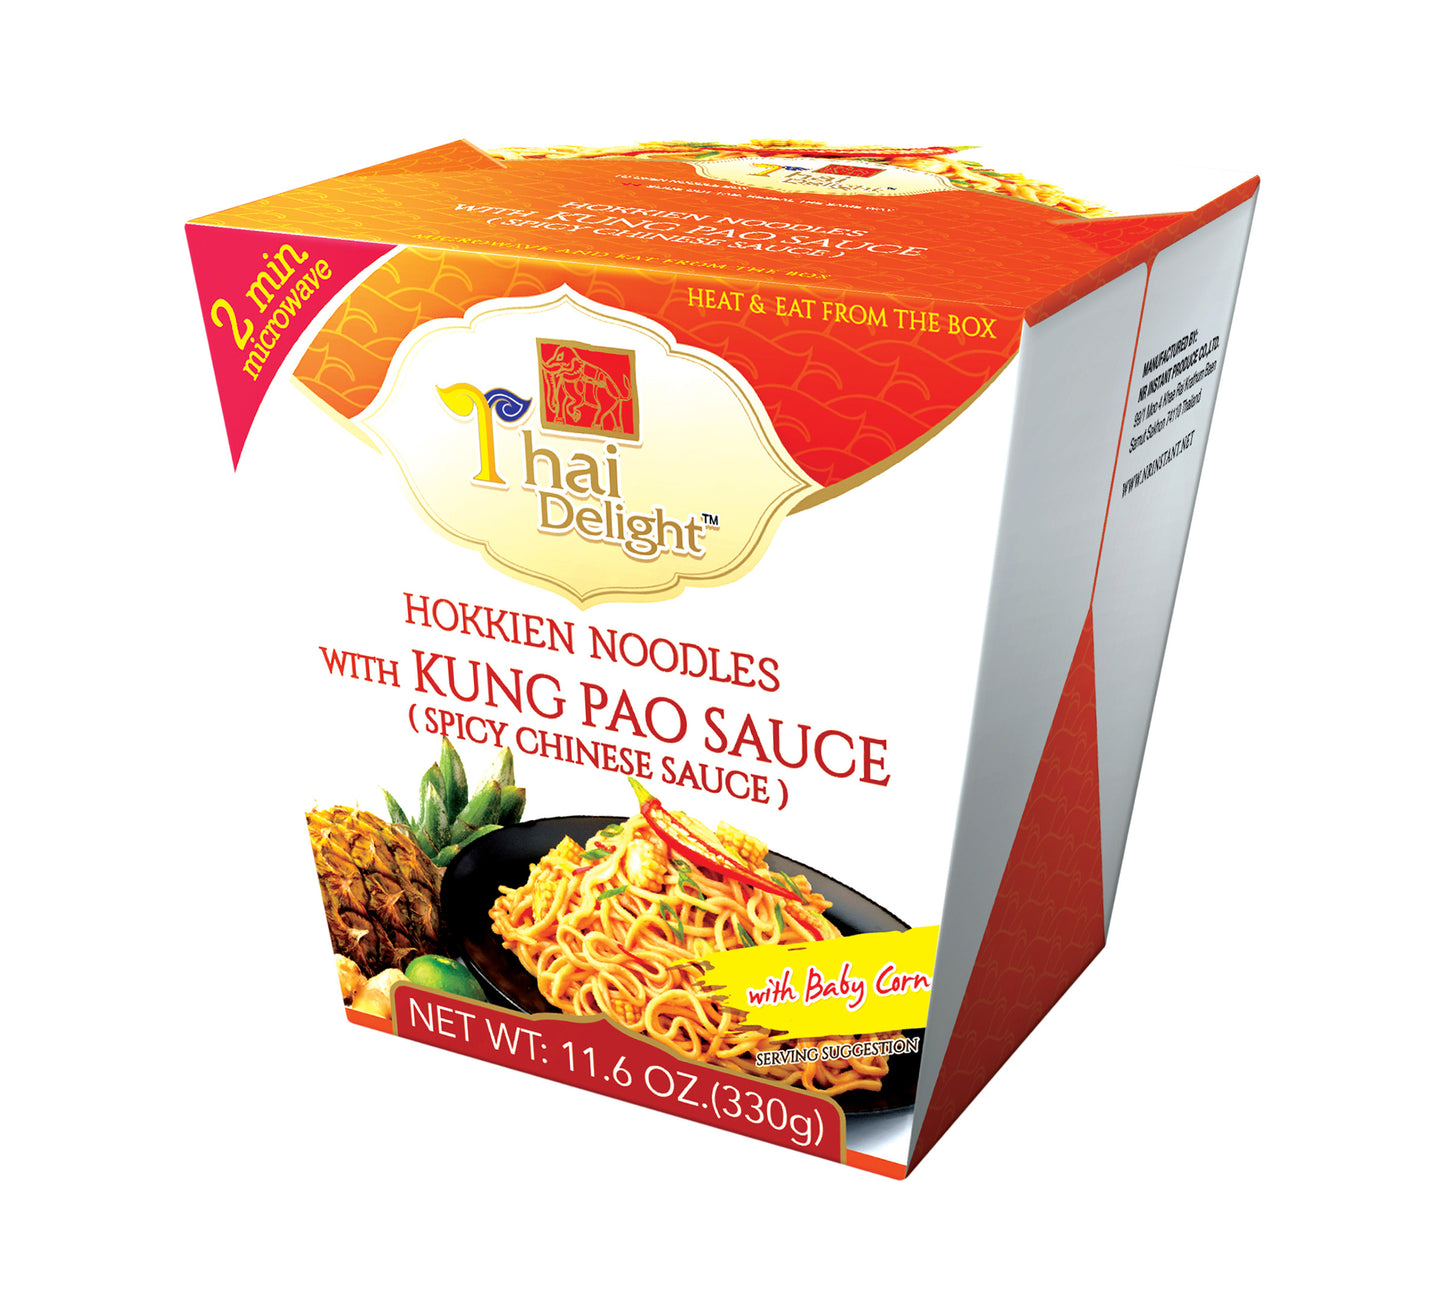 Thai Delight Hokkien Noodles with Kung Pao Sauce (Spicy Chinese Sauce) (330 gr)